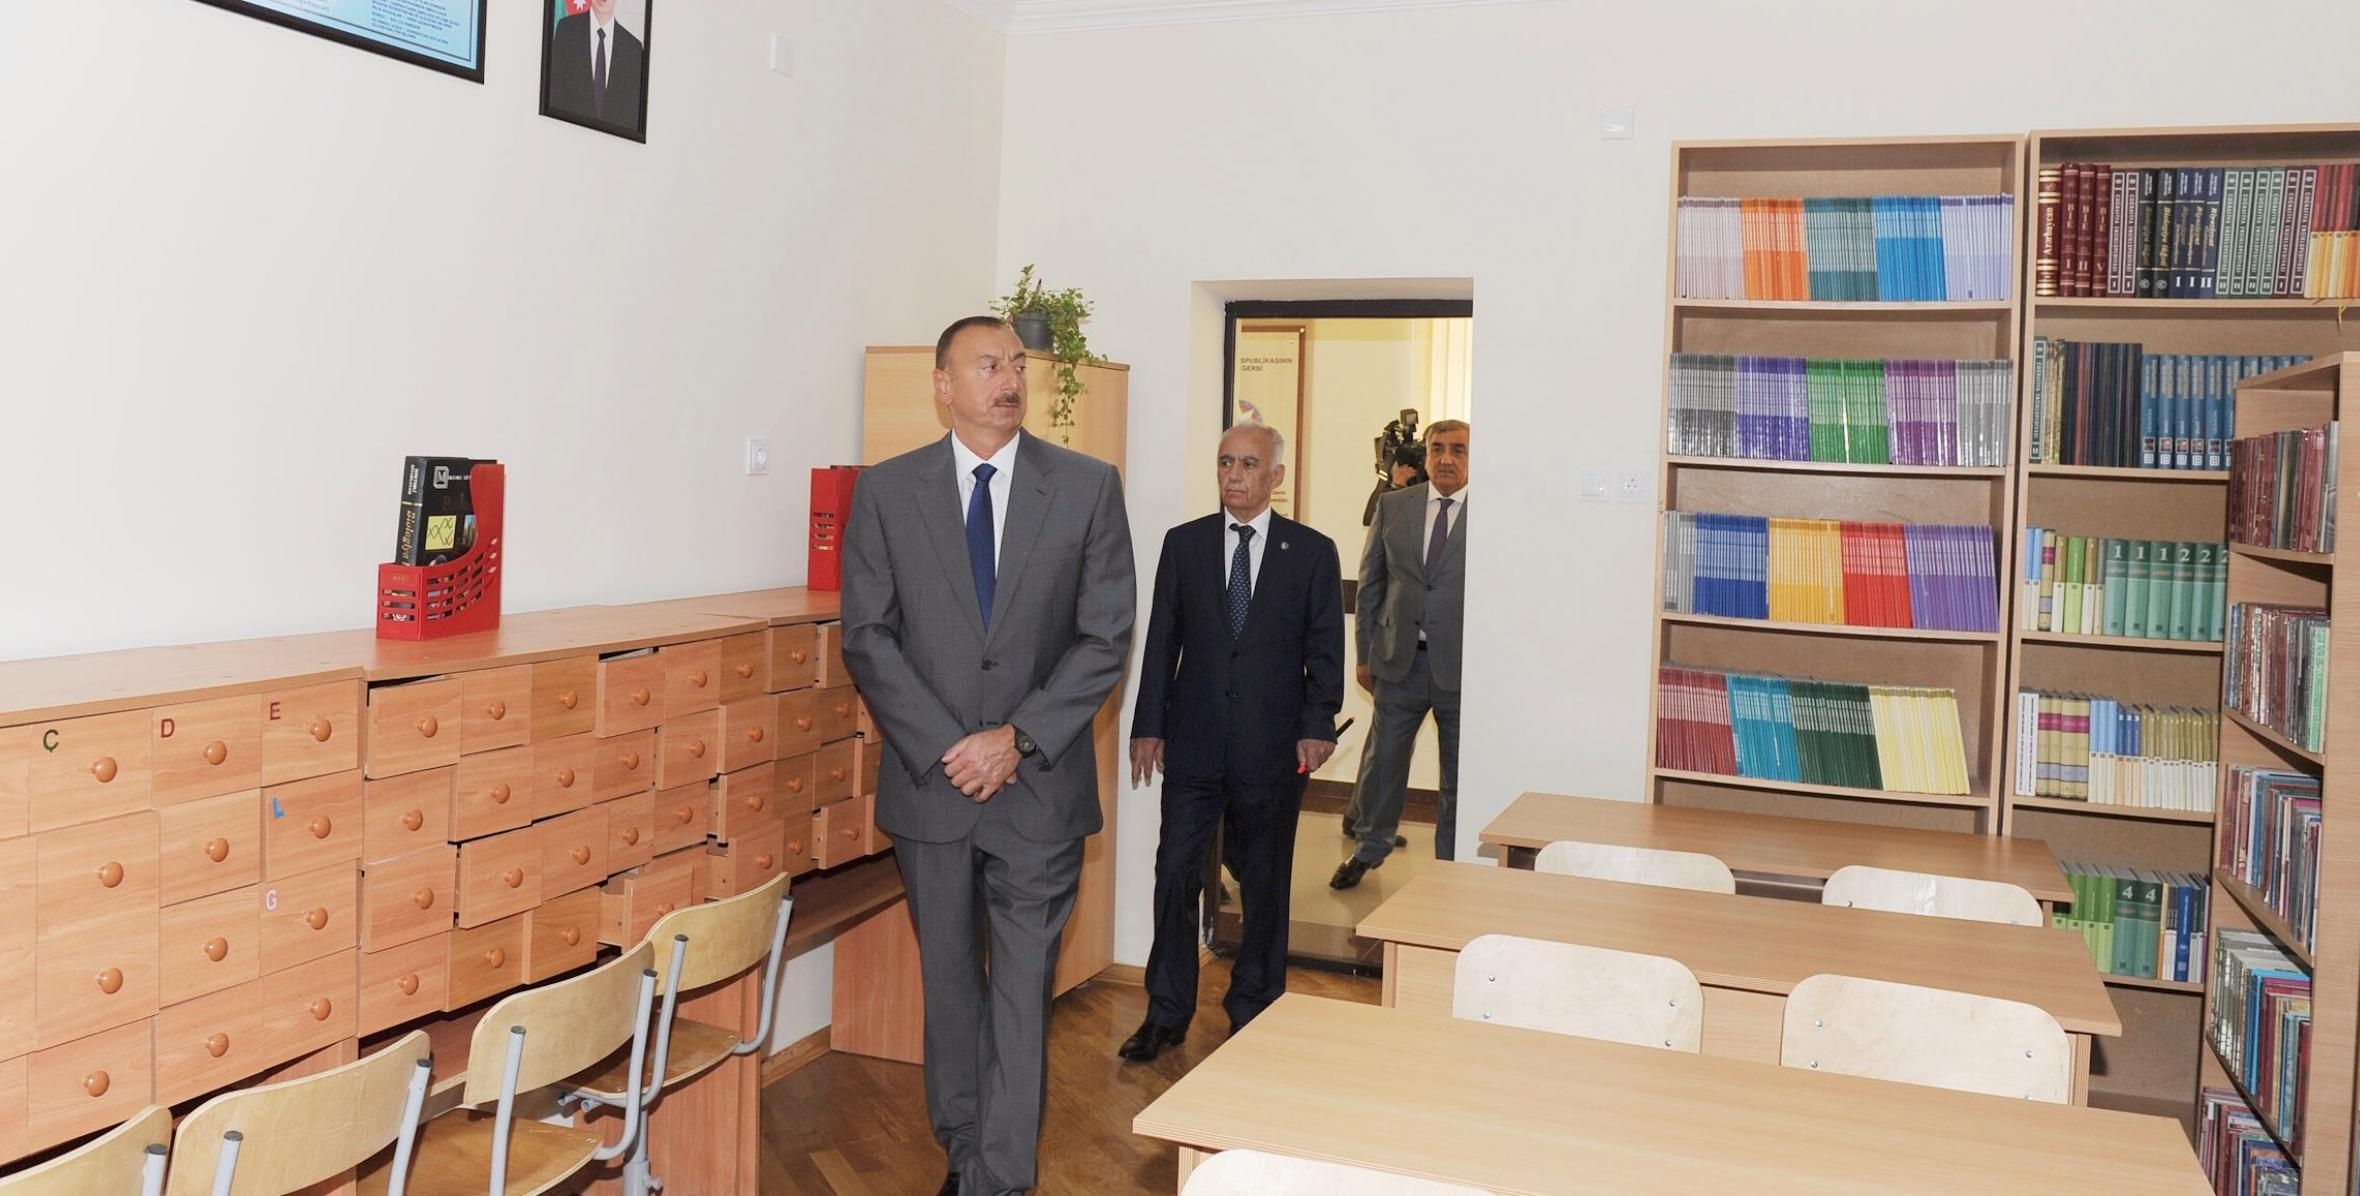 Ilham Aliyev reviewed secondary school No. 121 in Bina District after major repair and reconstruction